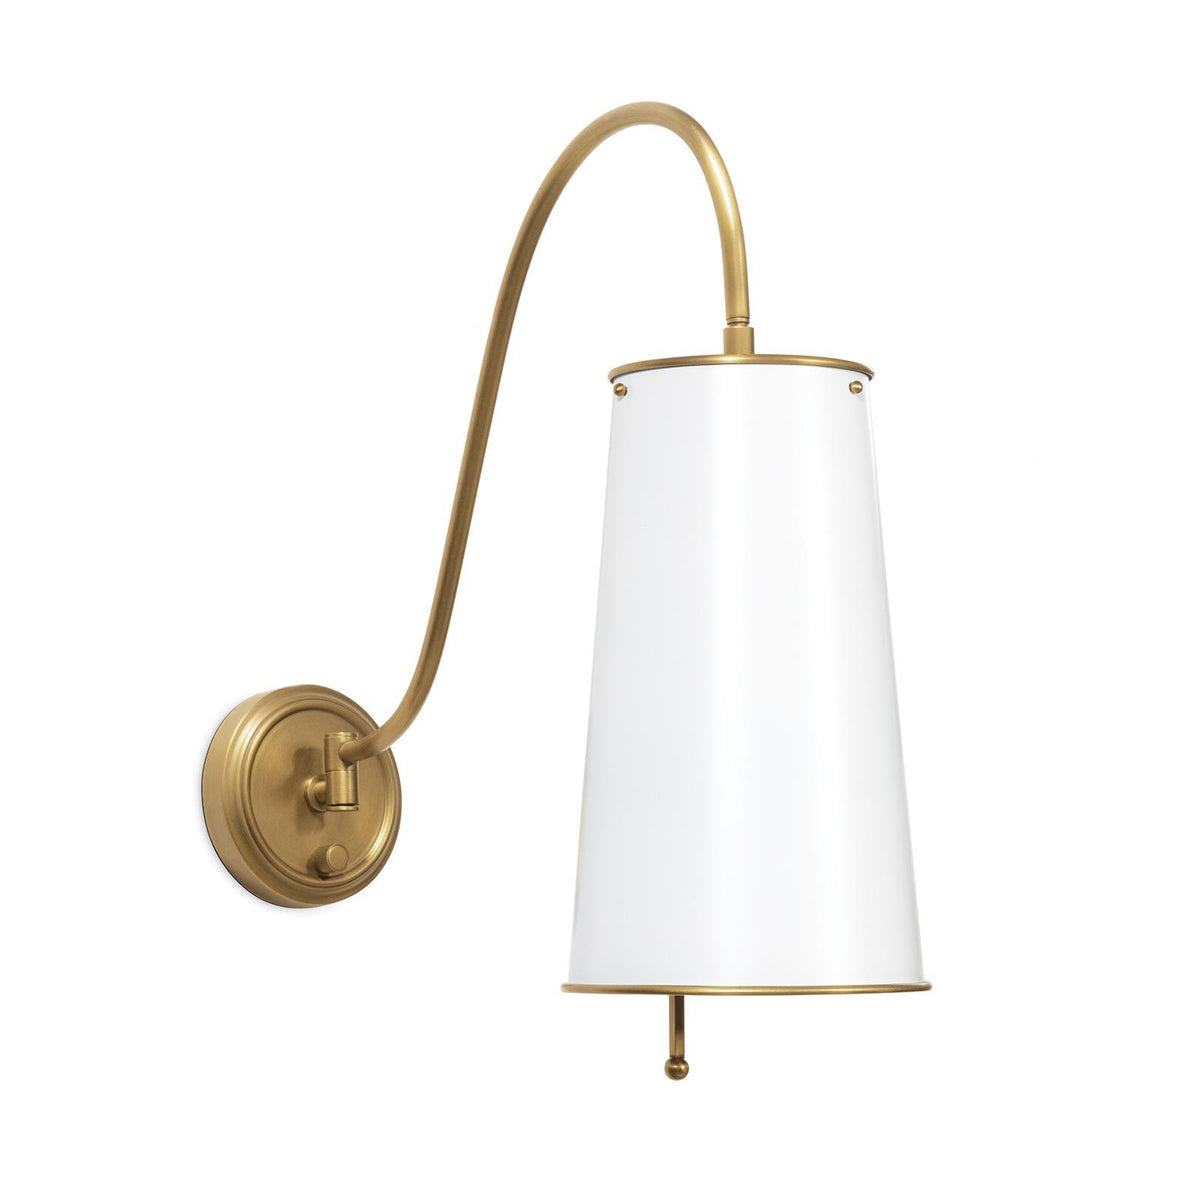 Regina Andrew - Southern Living Hattie Wall Sconce - 15-1194WT | Montreal Lighting & Hardware